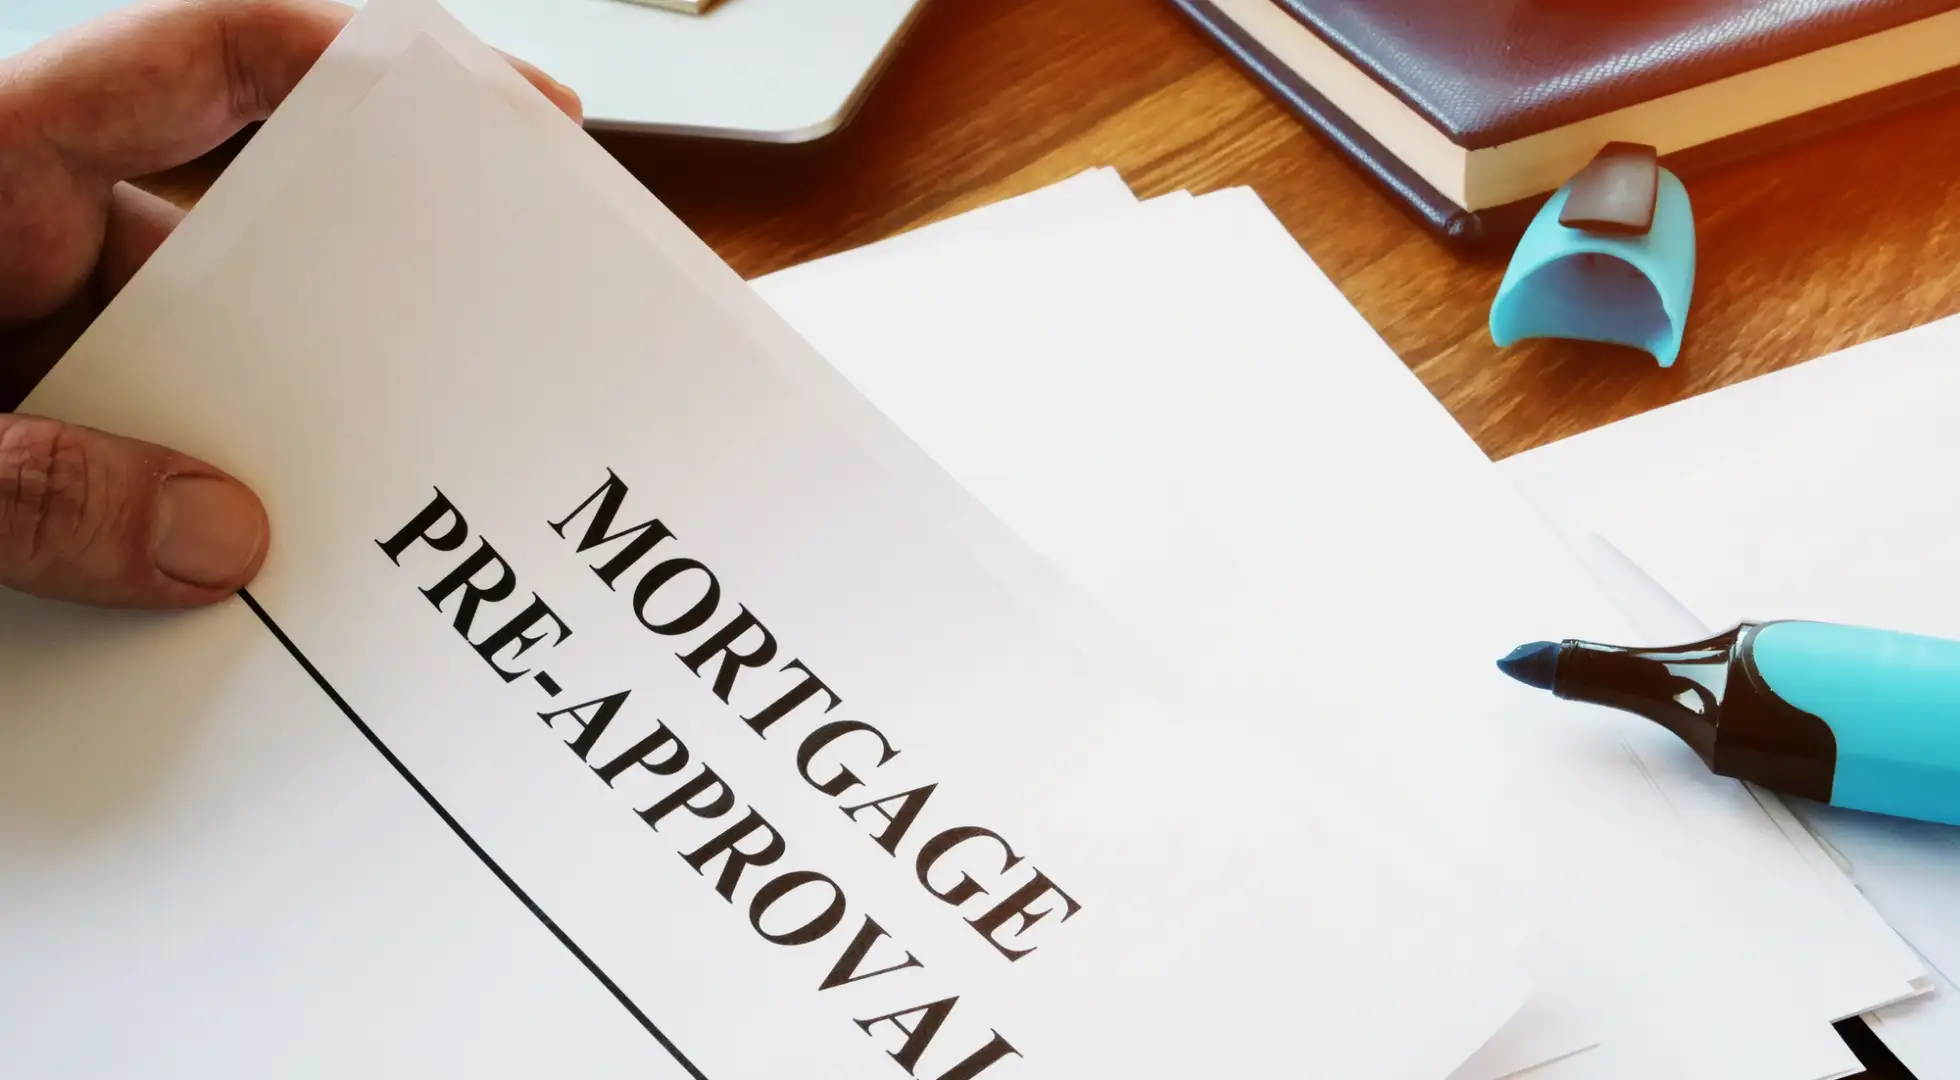 Mortgage Pre-Approval: Seven simple steps to help you secure a loan